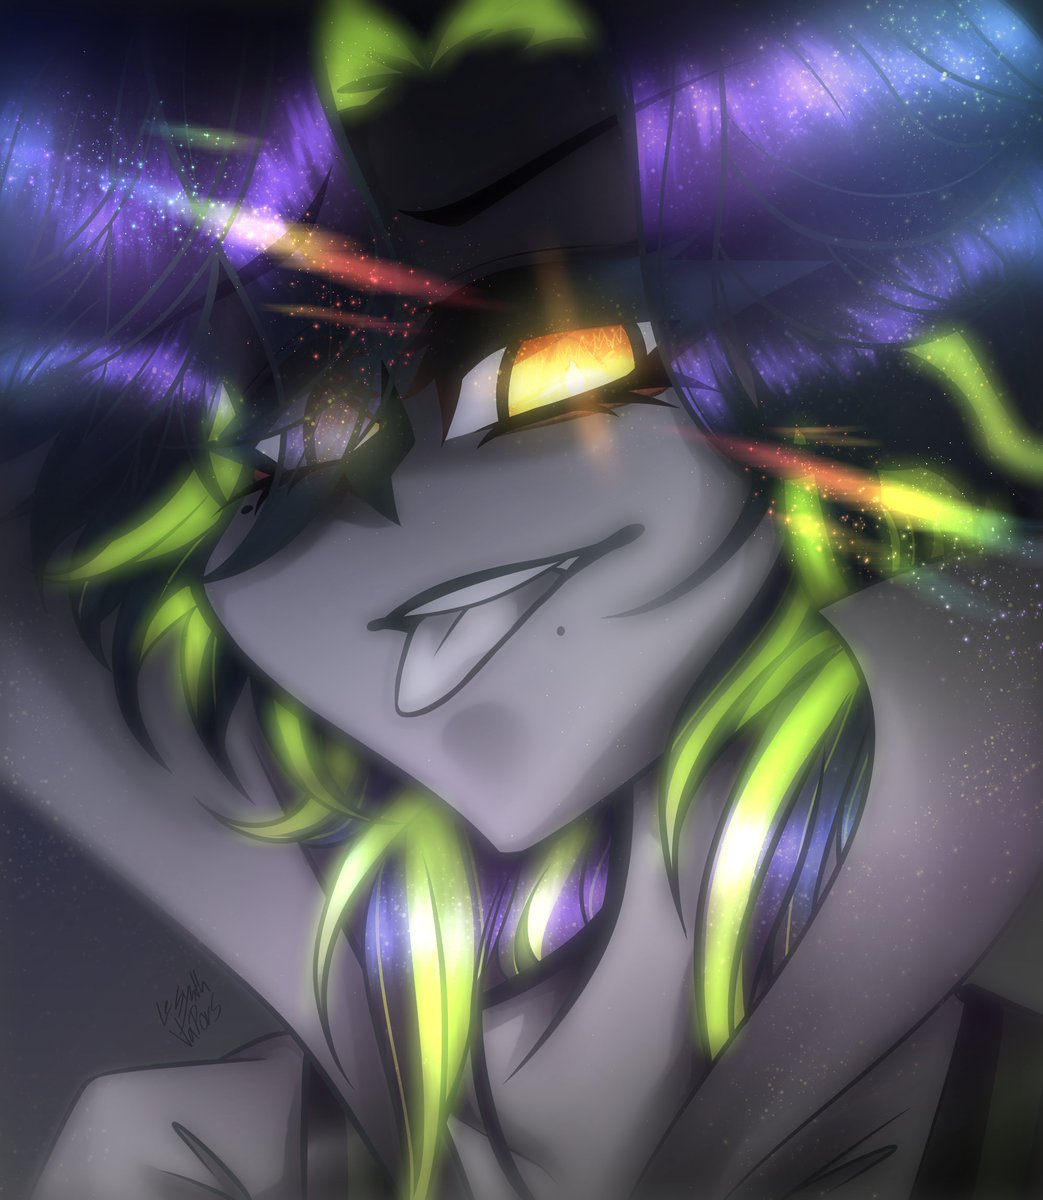 Ya know imagine if this boyo can actually make his strands glow ayayaya anyway there is a altered of this, aka one the someone asked for idk the unhinged win kekw- thats in the comments ANYWAY ENJOY THIS BADASS PICTURE THO WOOOOO #MUJINREX